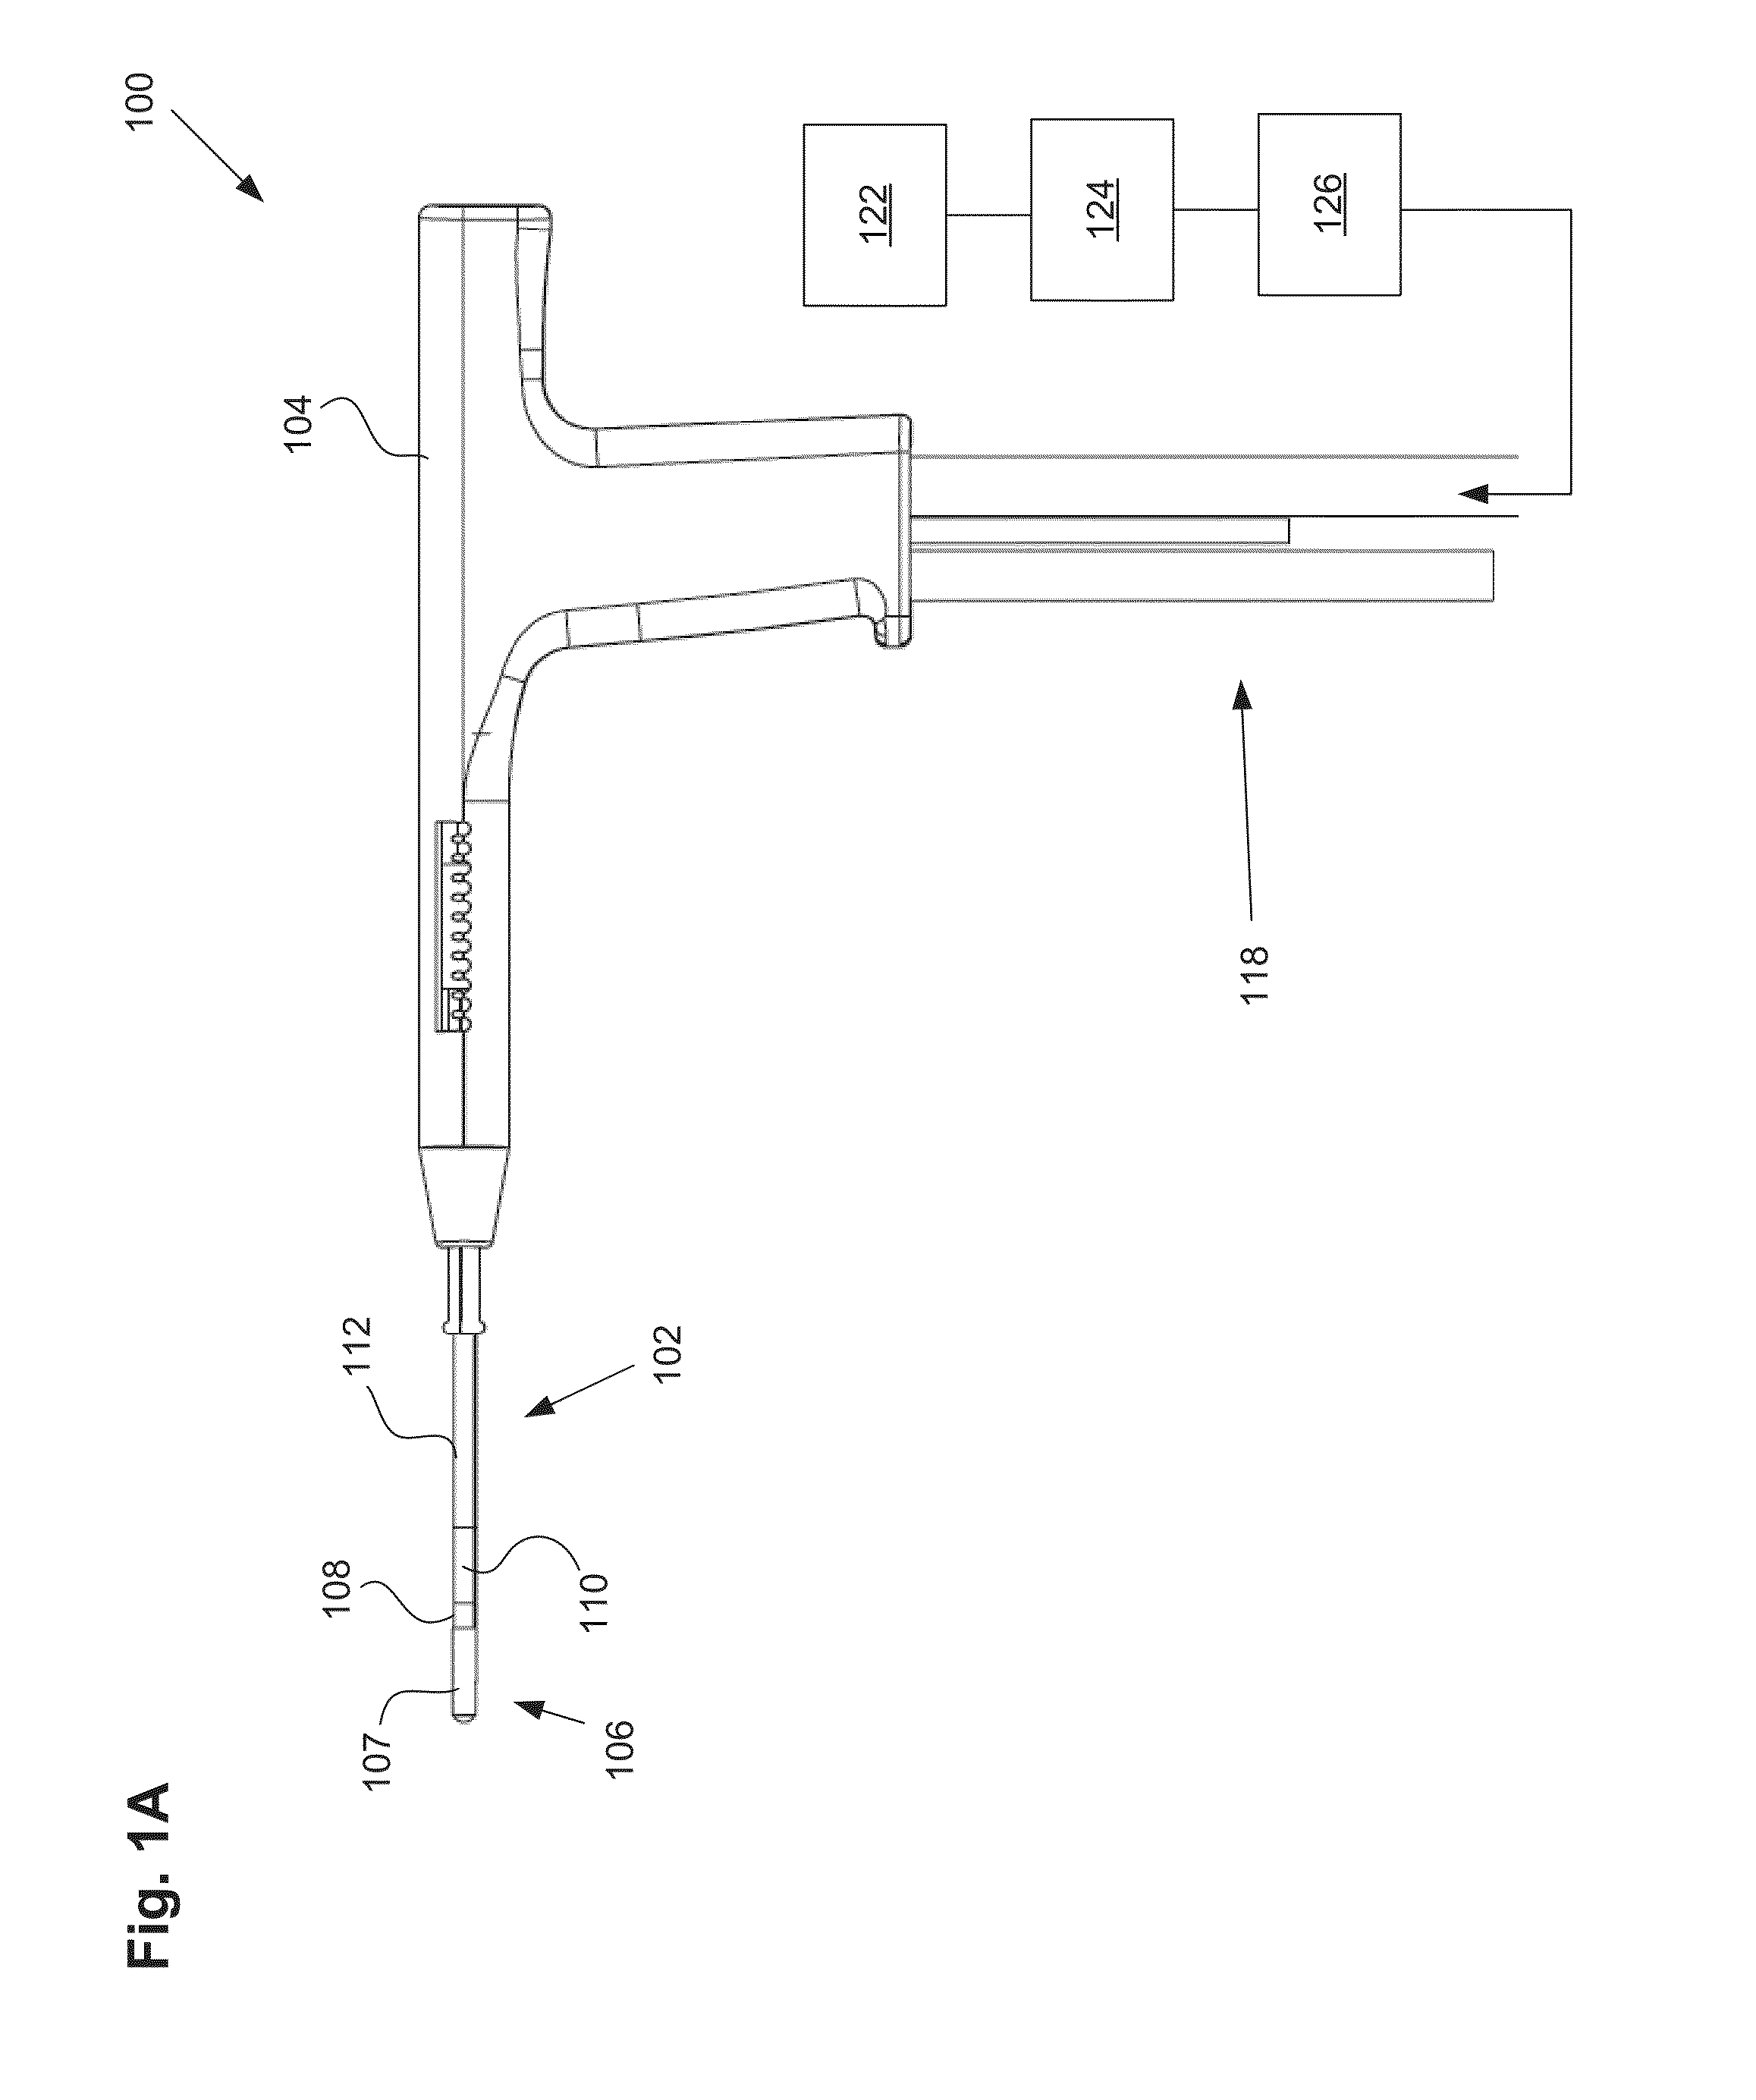 Integrity Testing Method and Apparatus for Delivering Vapor to the Uterus